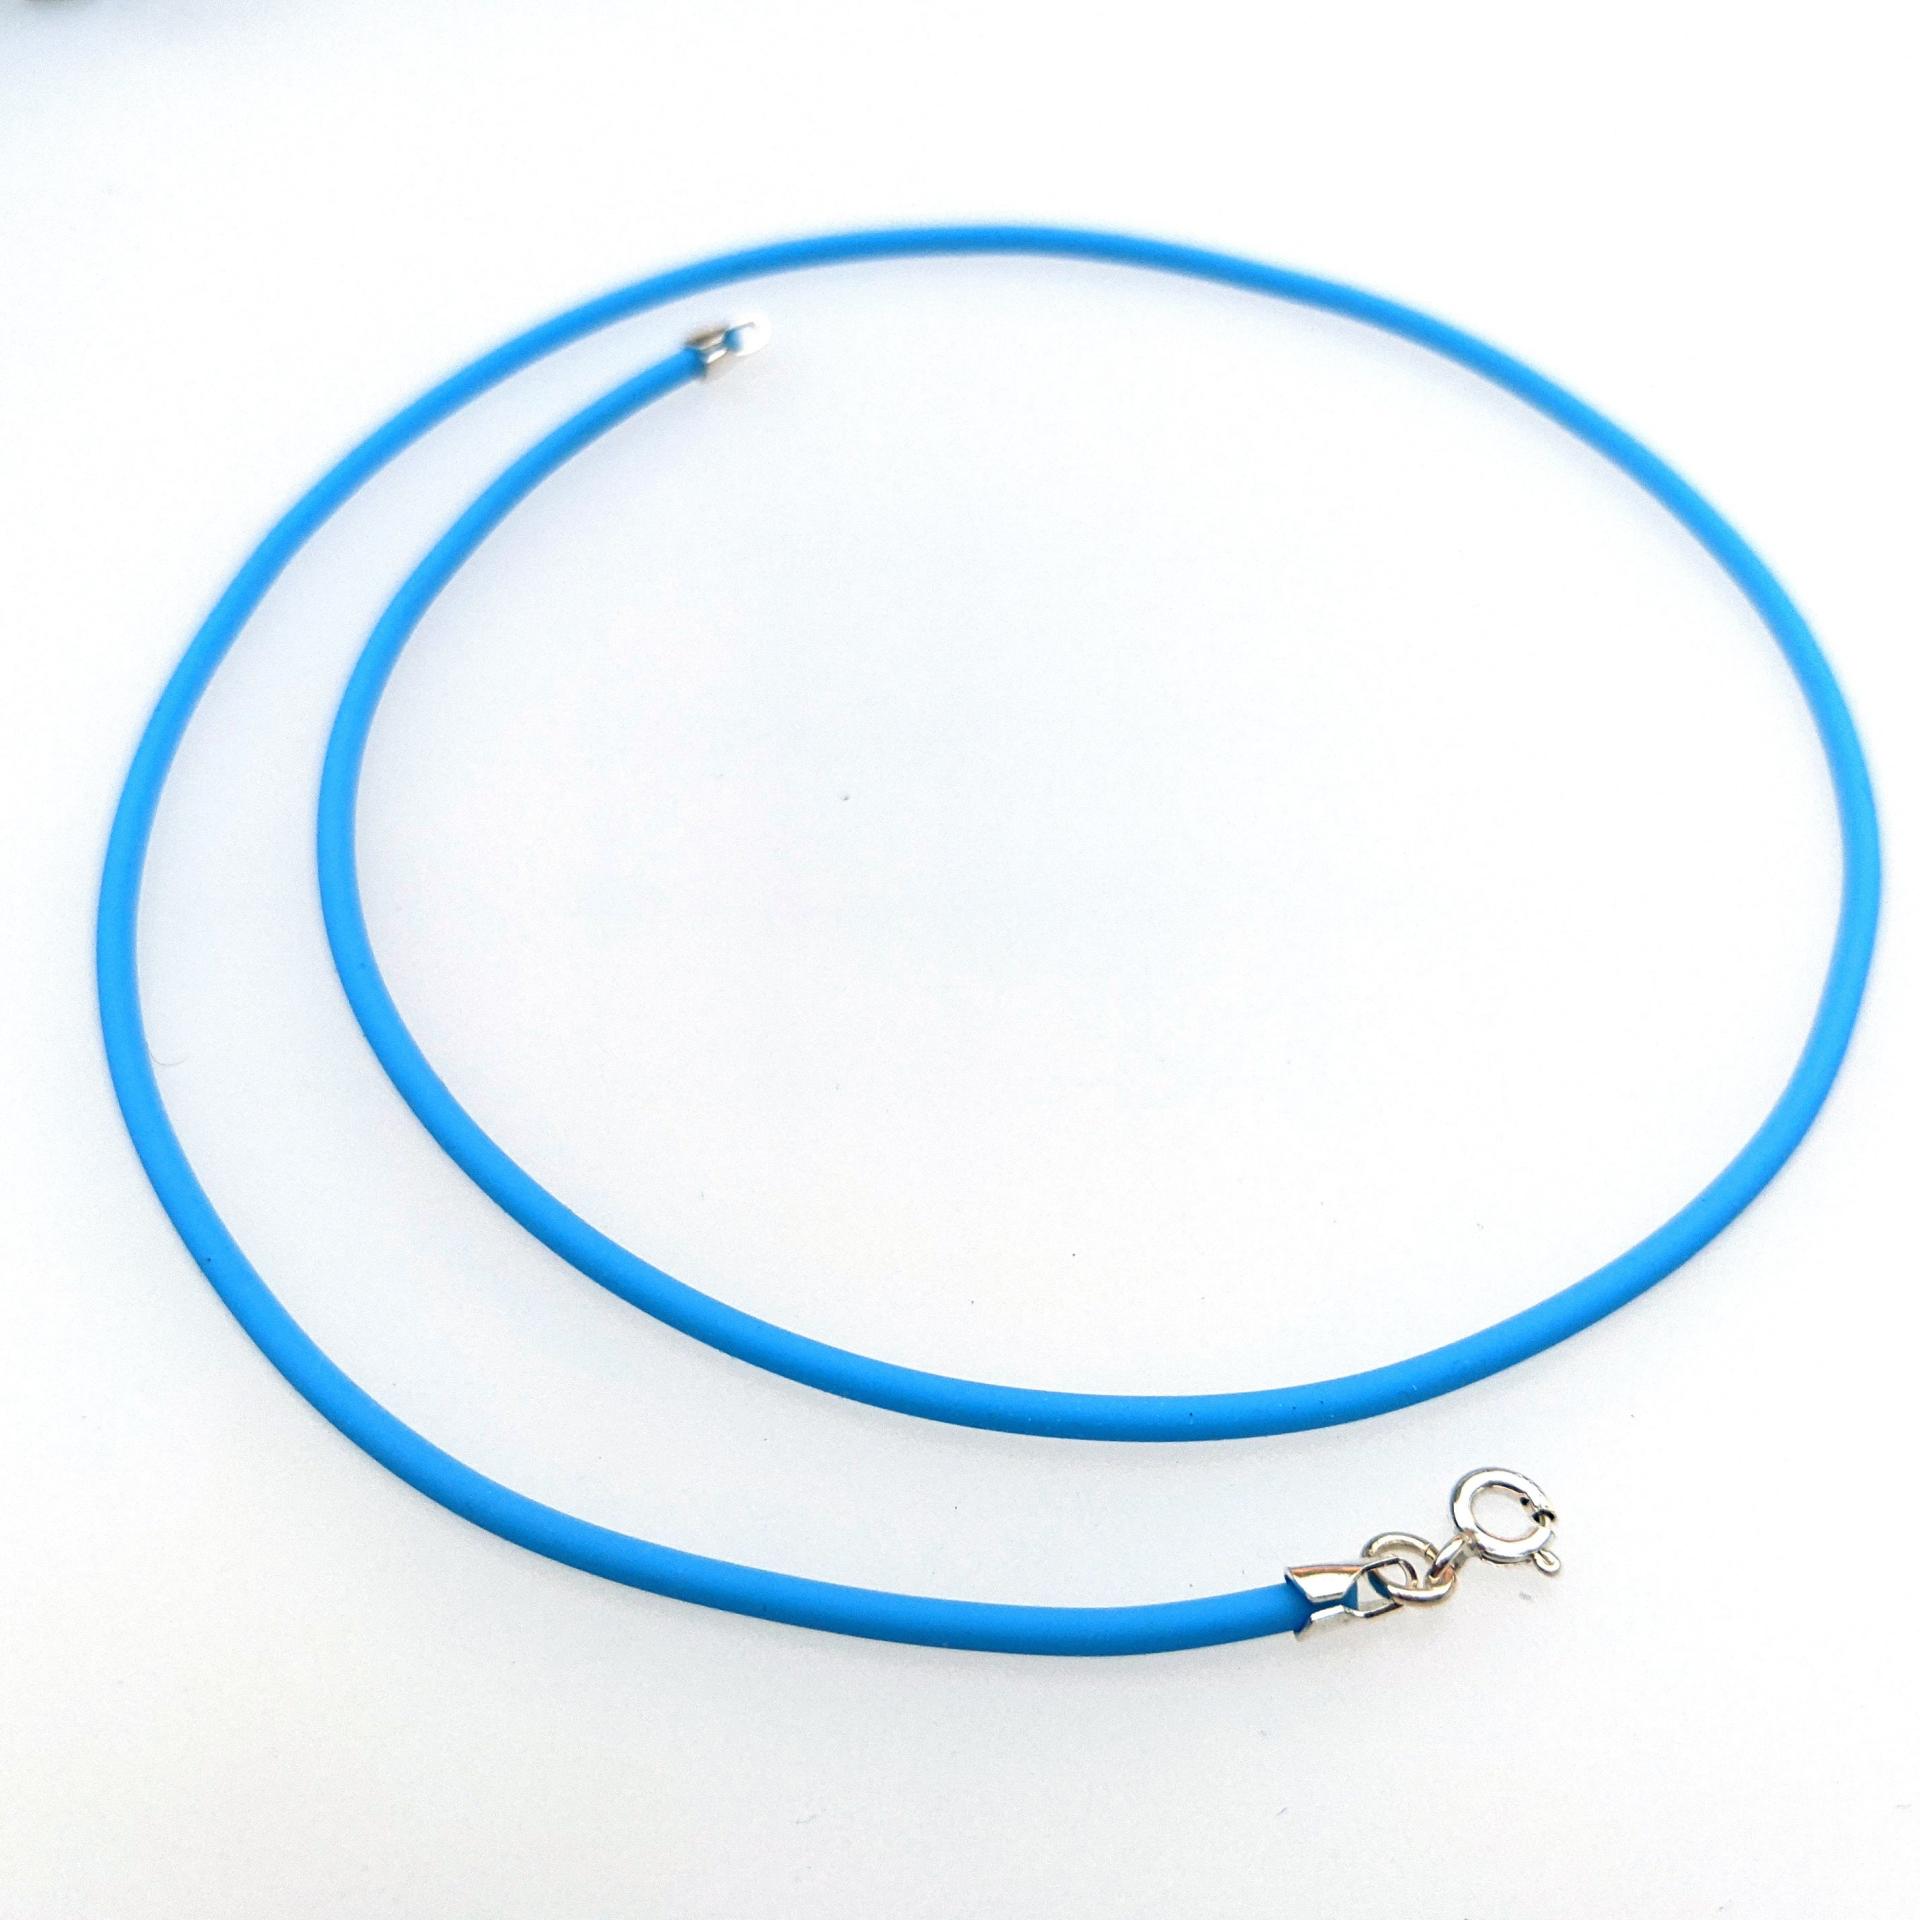 Turquoise Rubber Cord Necklace, 2mm, Sterling Clasp, Interchangeable, 16", 18", 20", 22", 24"